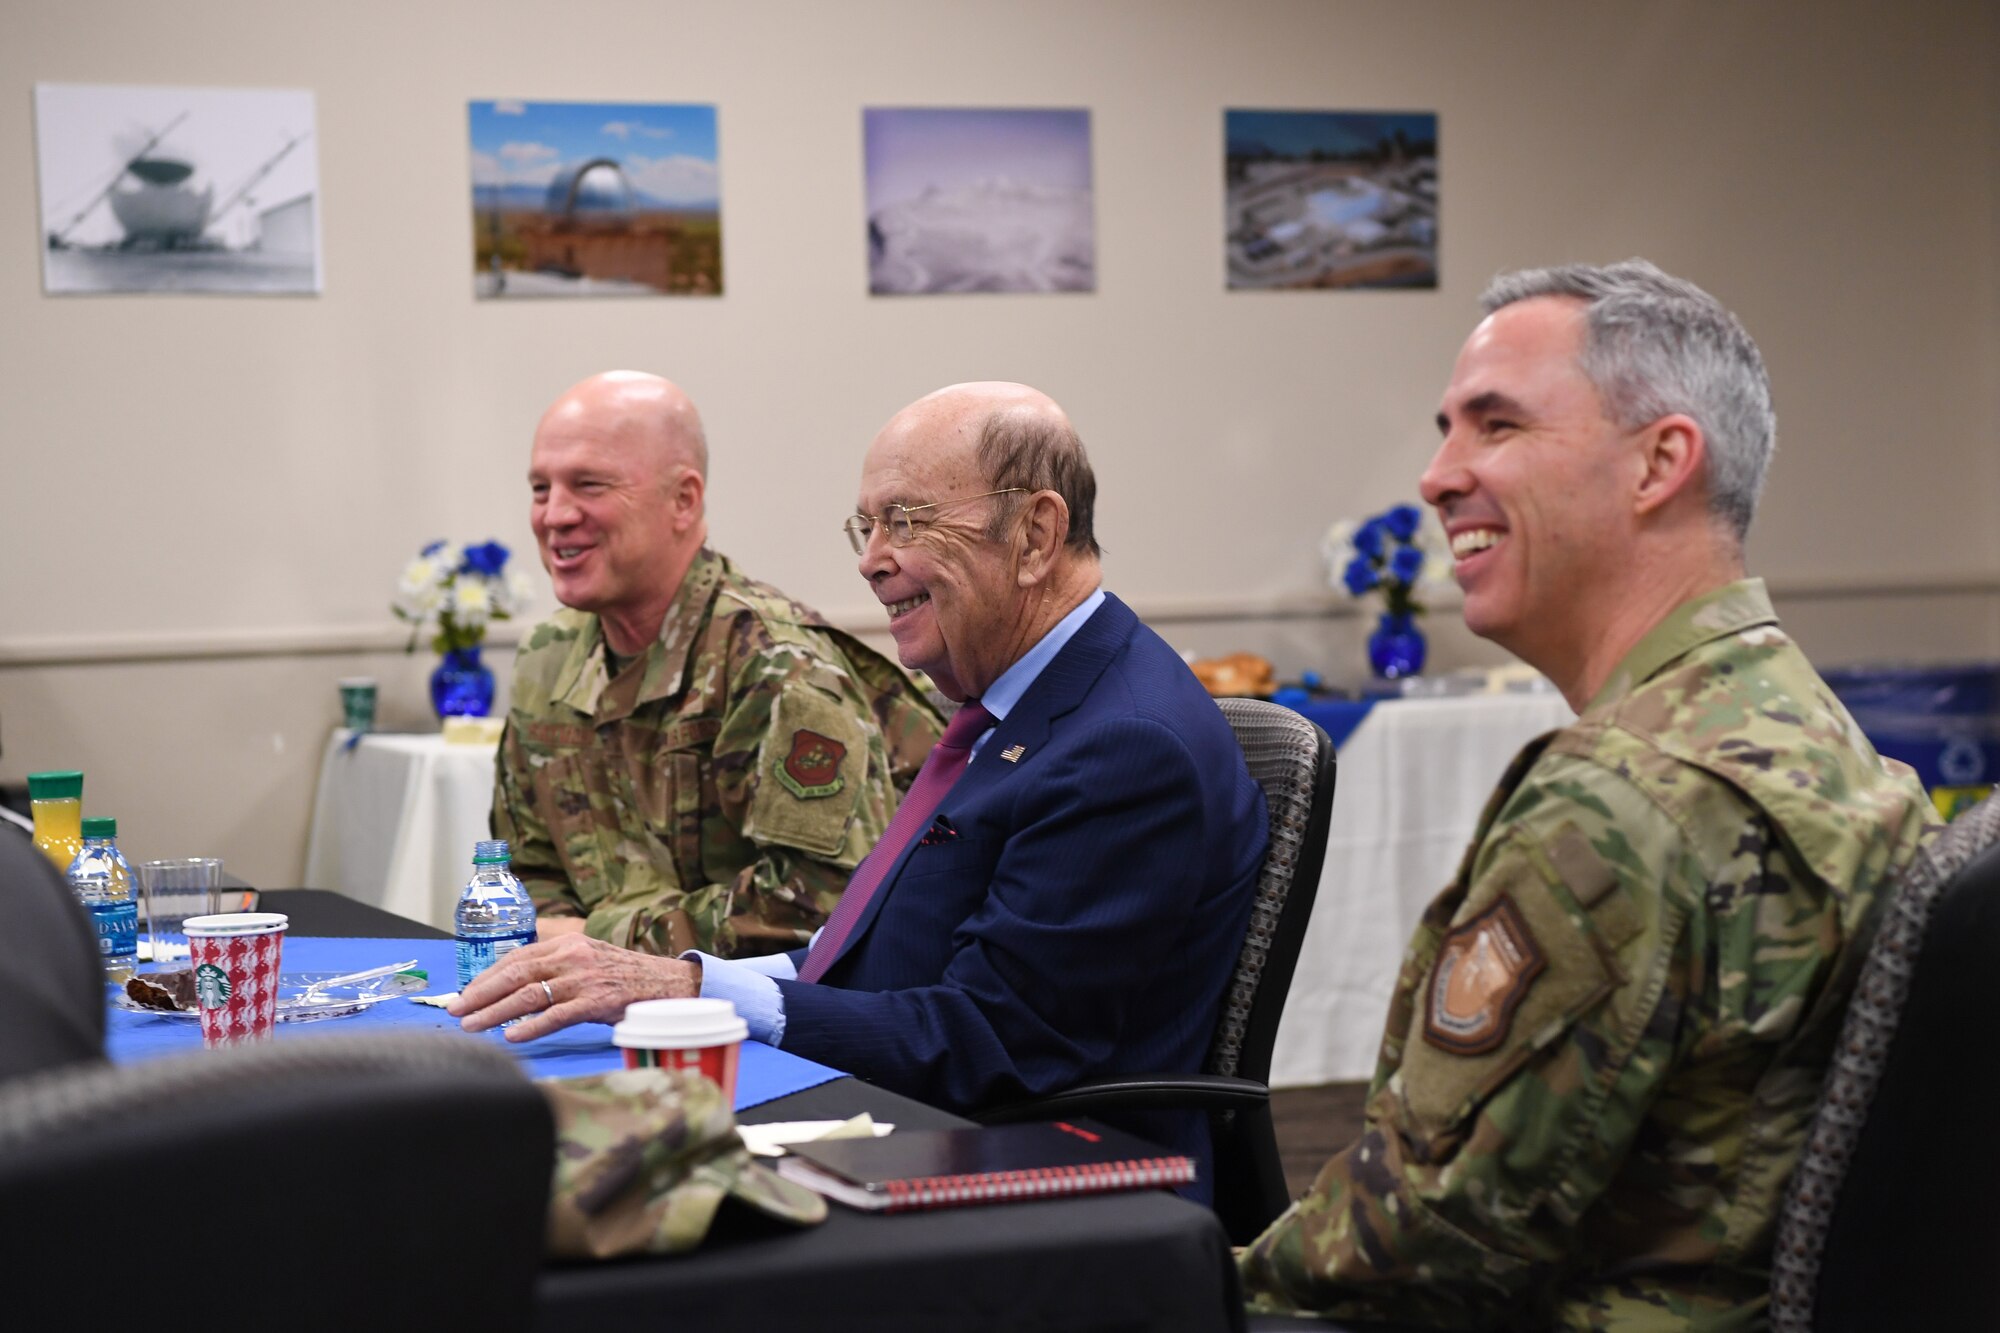 U.S. Secretary of Commerce Wilbur Ross (center), Joint Force Space Component Commander Gen. Jay Raymond (left), and Deputy Joint Force Space Component Commander Maj. Gen. Stephen Whiting (right) receiving a briefing about www.space-track.org in the Combined Space Operations Center at Vandenberg AFB, Calif., Nov. 30, 2018. Secretary Ross met with service members from the 18th Space Control Squadron, Combined Space Operations Center, Joint Force Space Component Command and U.S. Strategic Command to discuss Space Situational Awareness capabilities and space operations during a visit here Nov. 29-30. Secretary Ross also spoke with service members about the Department of Defense transitioning non-military aspects of Space Situational Awareness and space safety monitoring and responsibilities to the Department of Commerce. (U.S. Air Force photo by Maj. Cody Chiles)